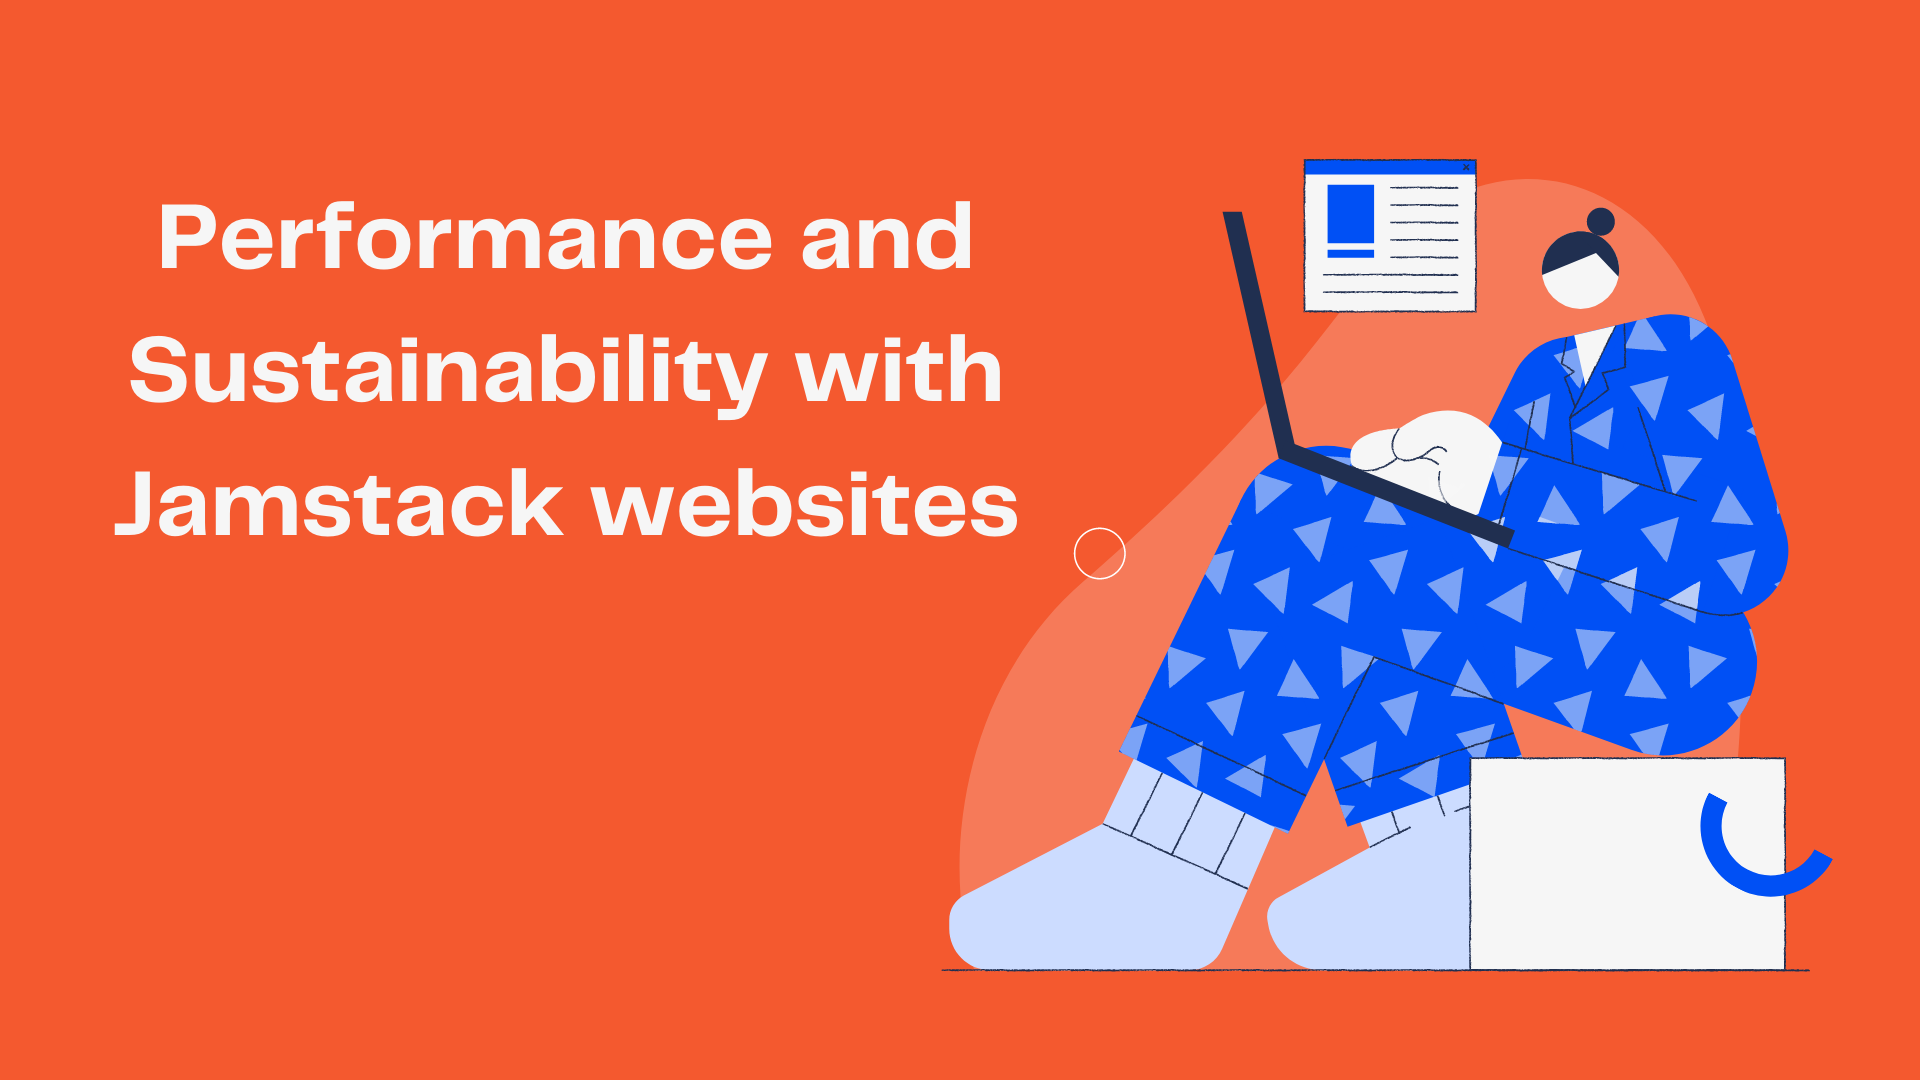 Performance and Sustainability with Jamstack websites